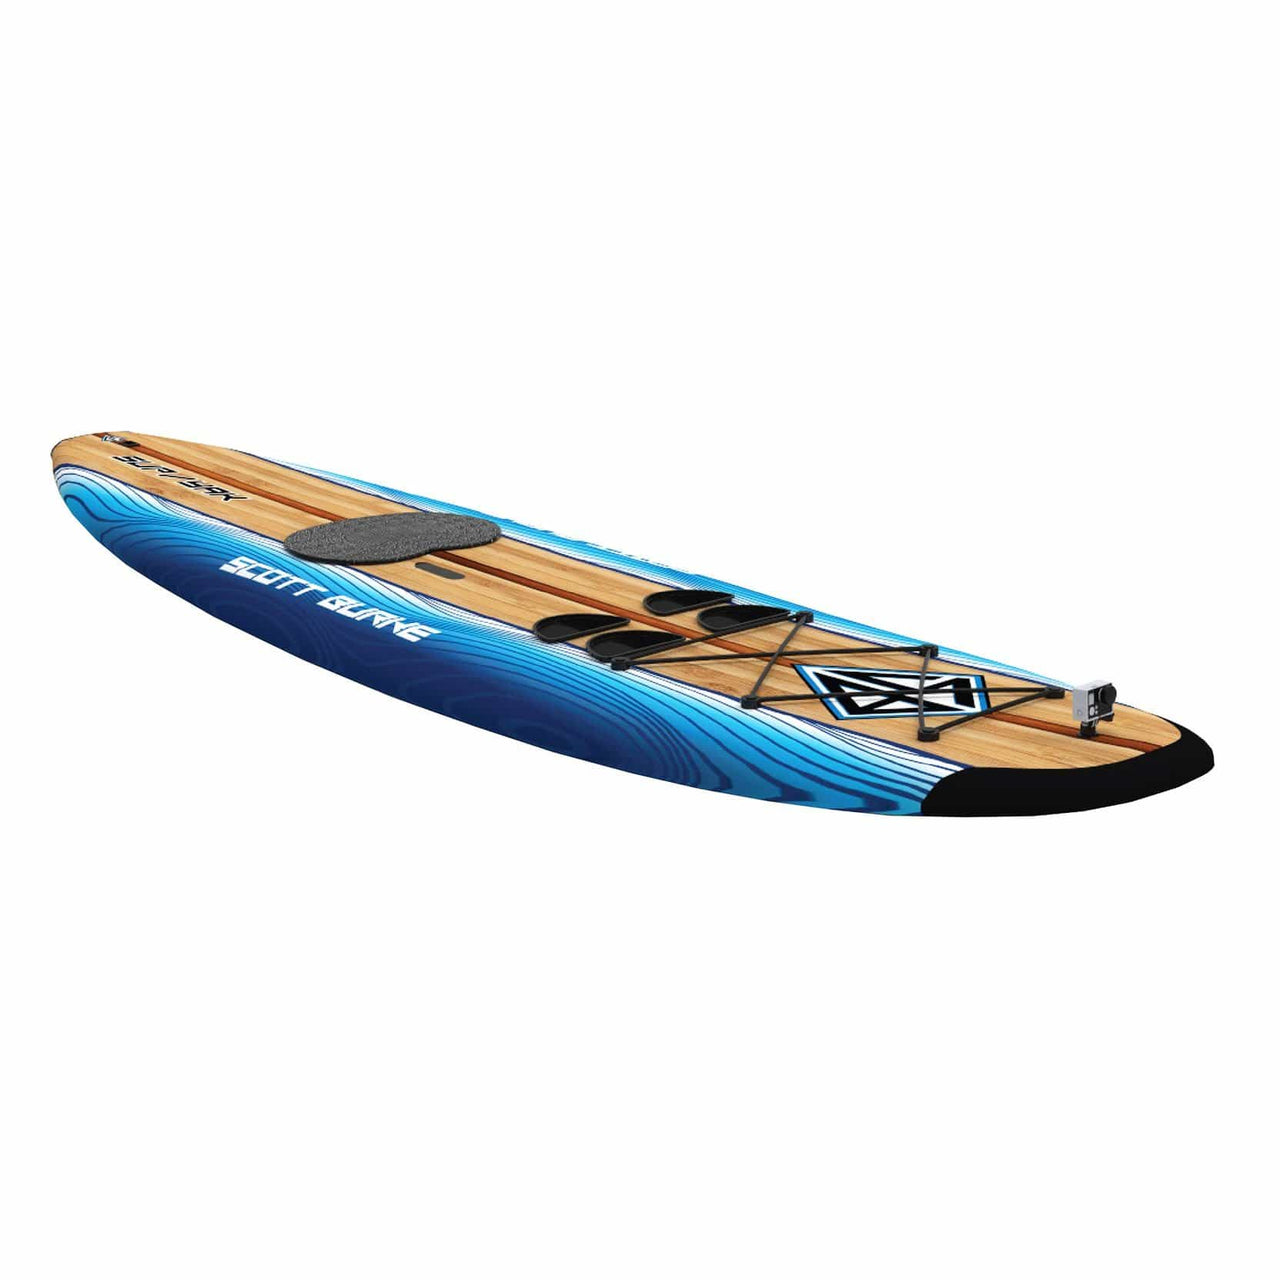 Scott Burke 10'6" SUP/YAK Crossover Stand Up Paddle Board 1